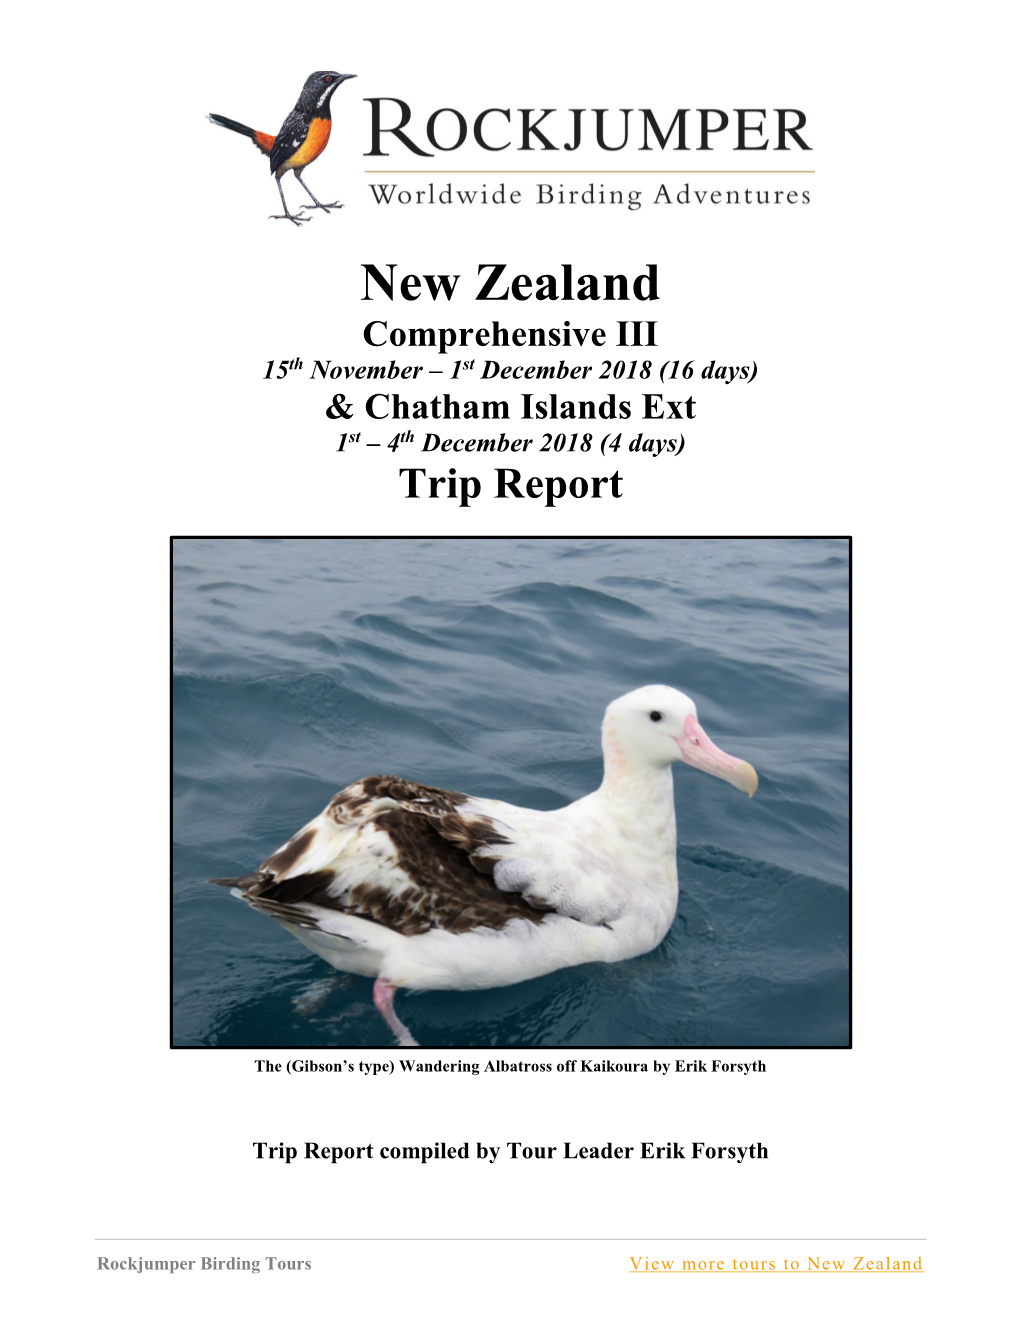 New Zealand Comprehensive III 15Th November – 1St December 2018 (16 Days) & Chatham Islands Ext 1St – 4Th December 2018 (4 Days) Trip Report